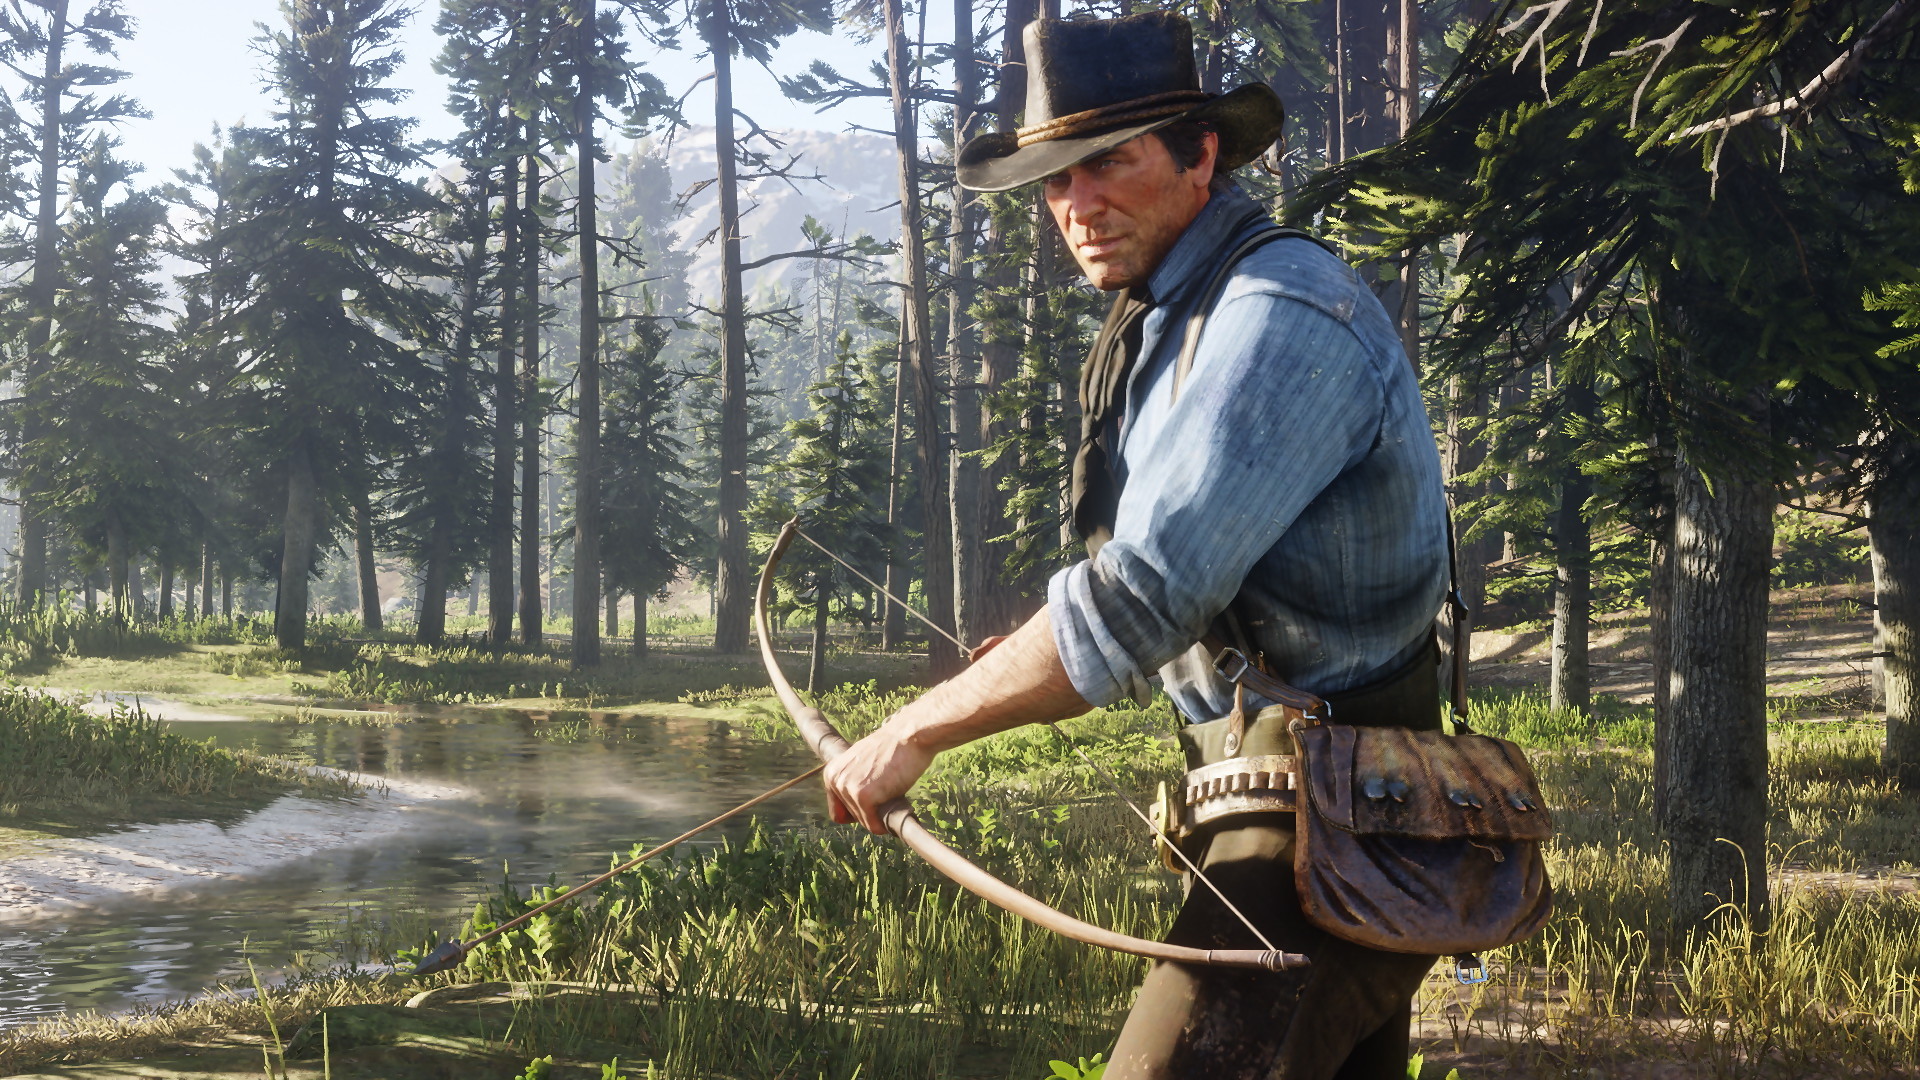 New Red Dead Redemption 2 Update Released by Rockstar Games, patch notes